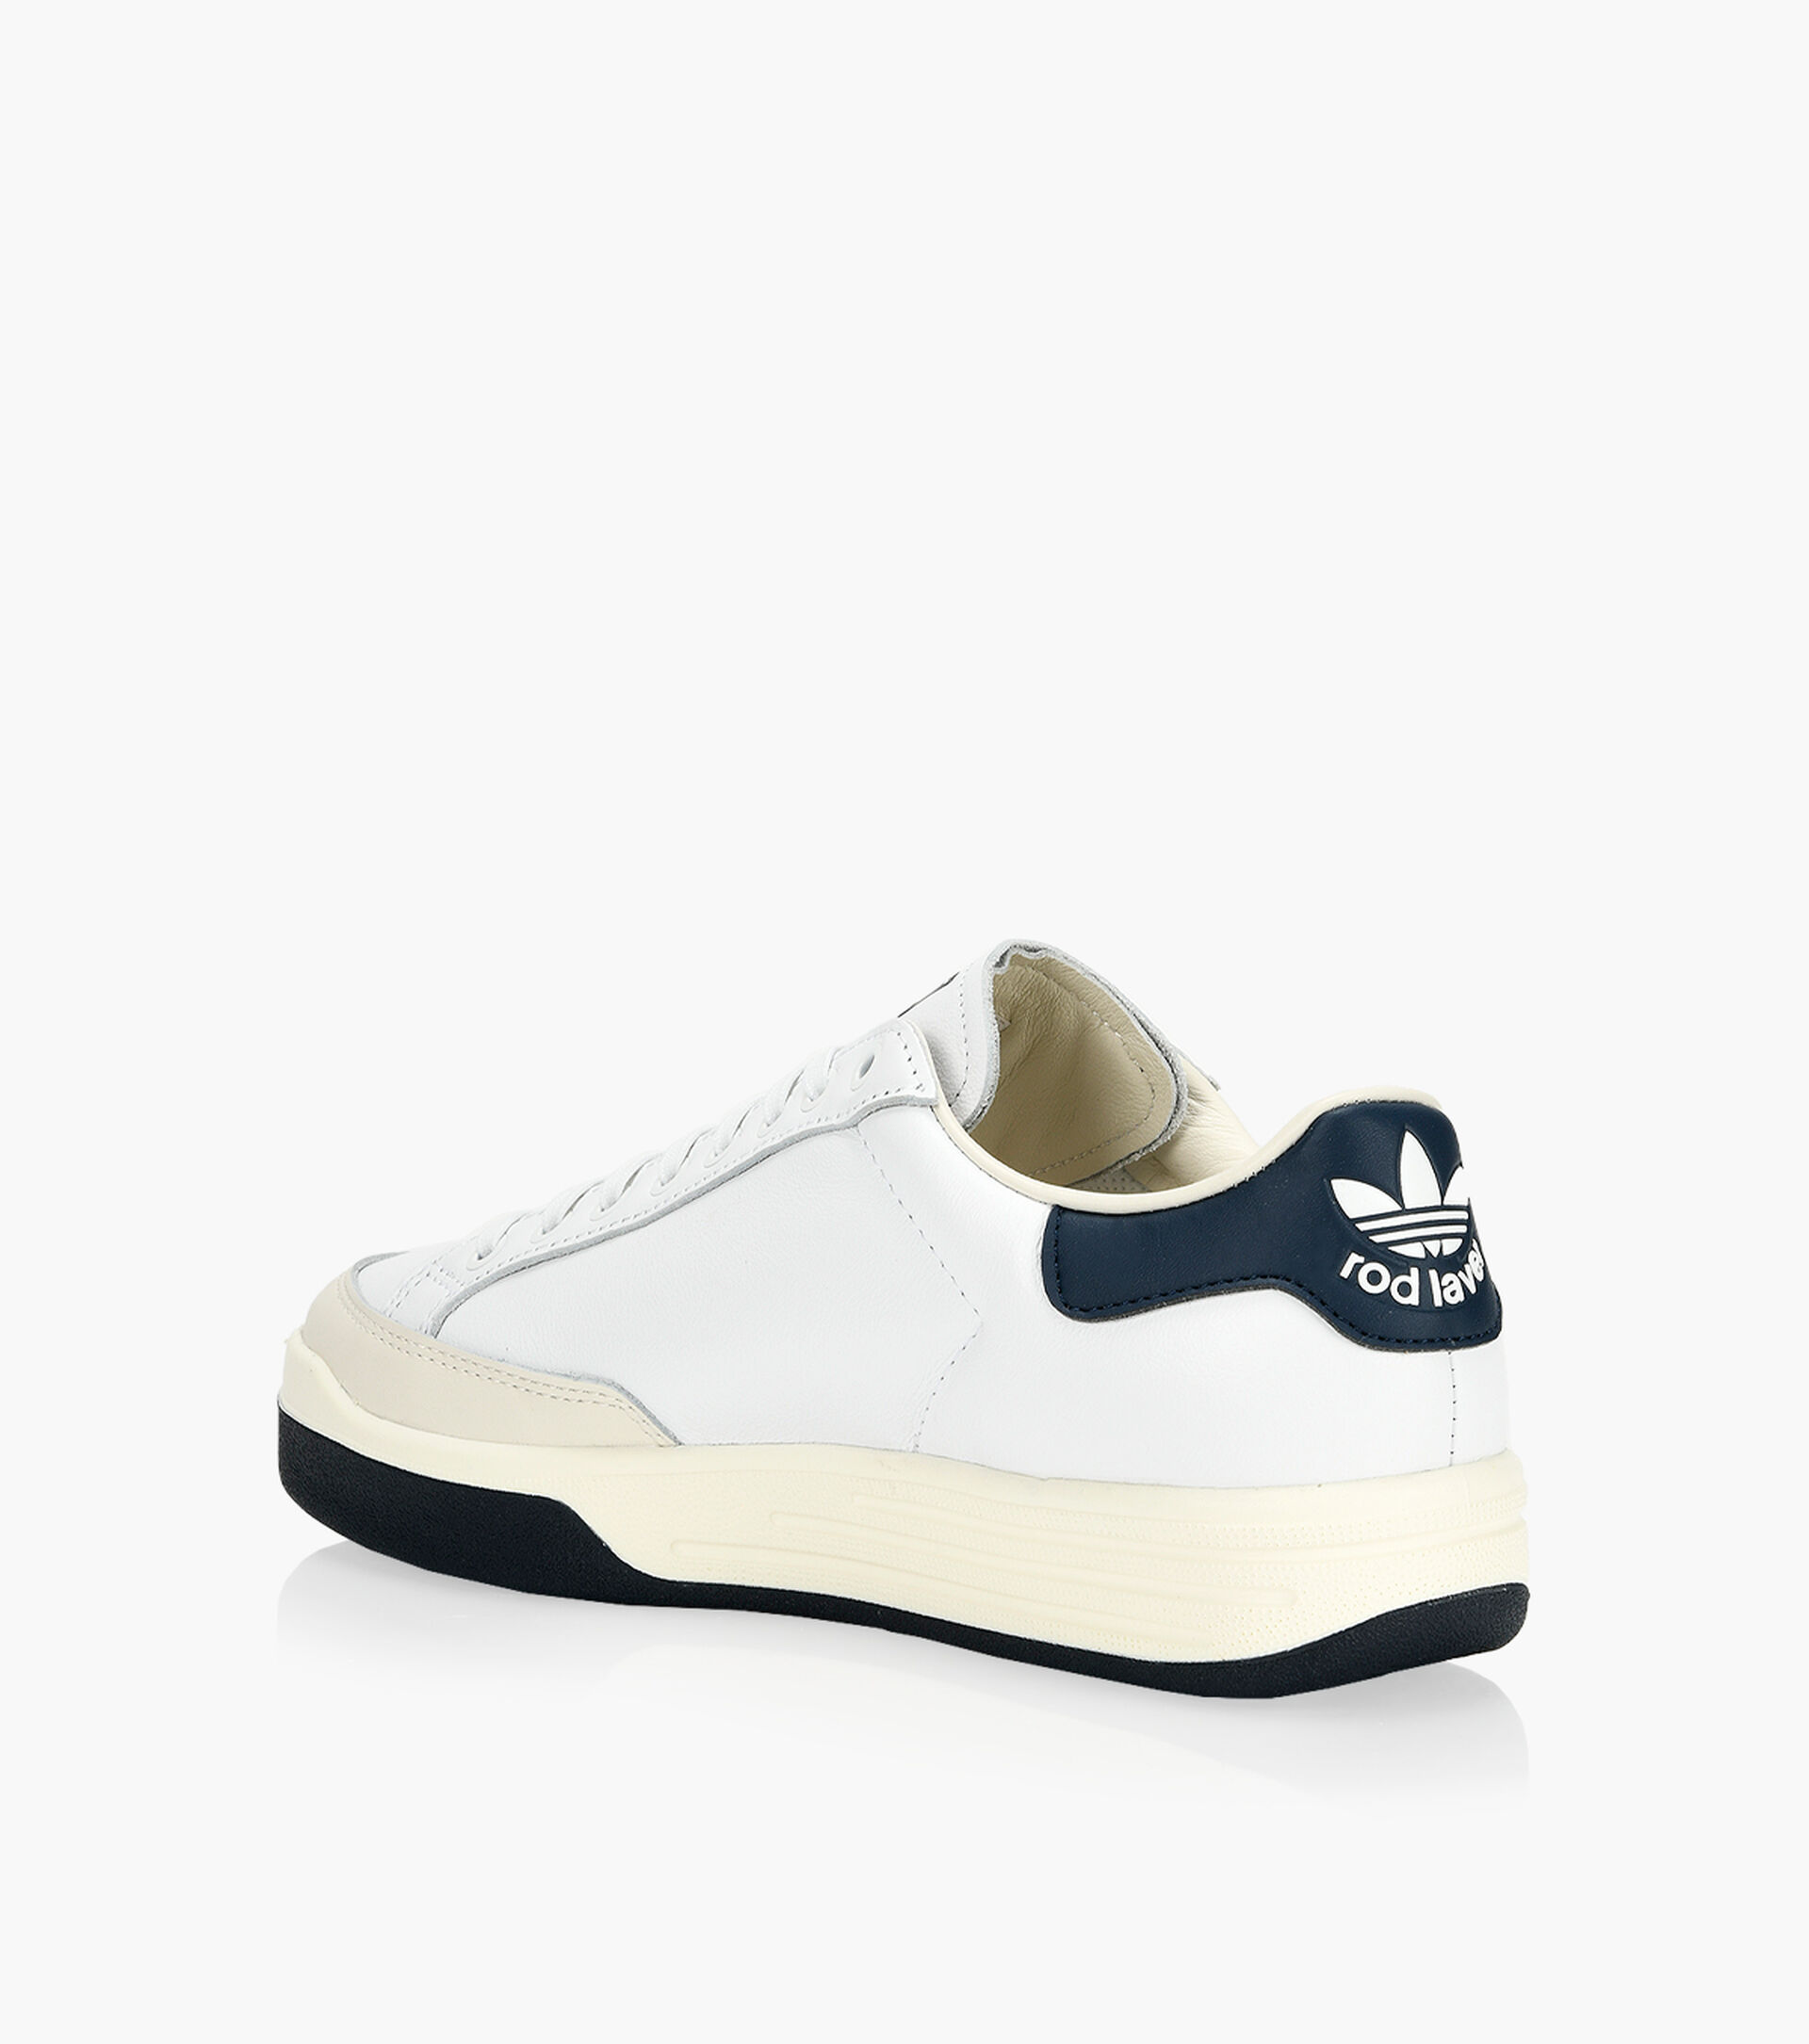 ADIDAS ROD LAVER - White Leather | Browns Shoes